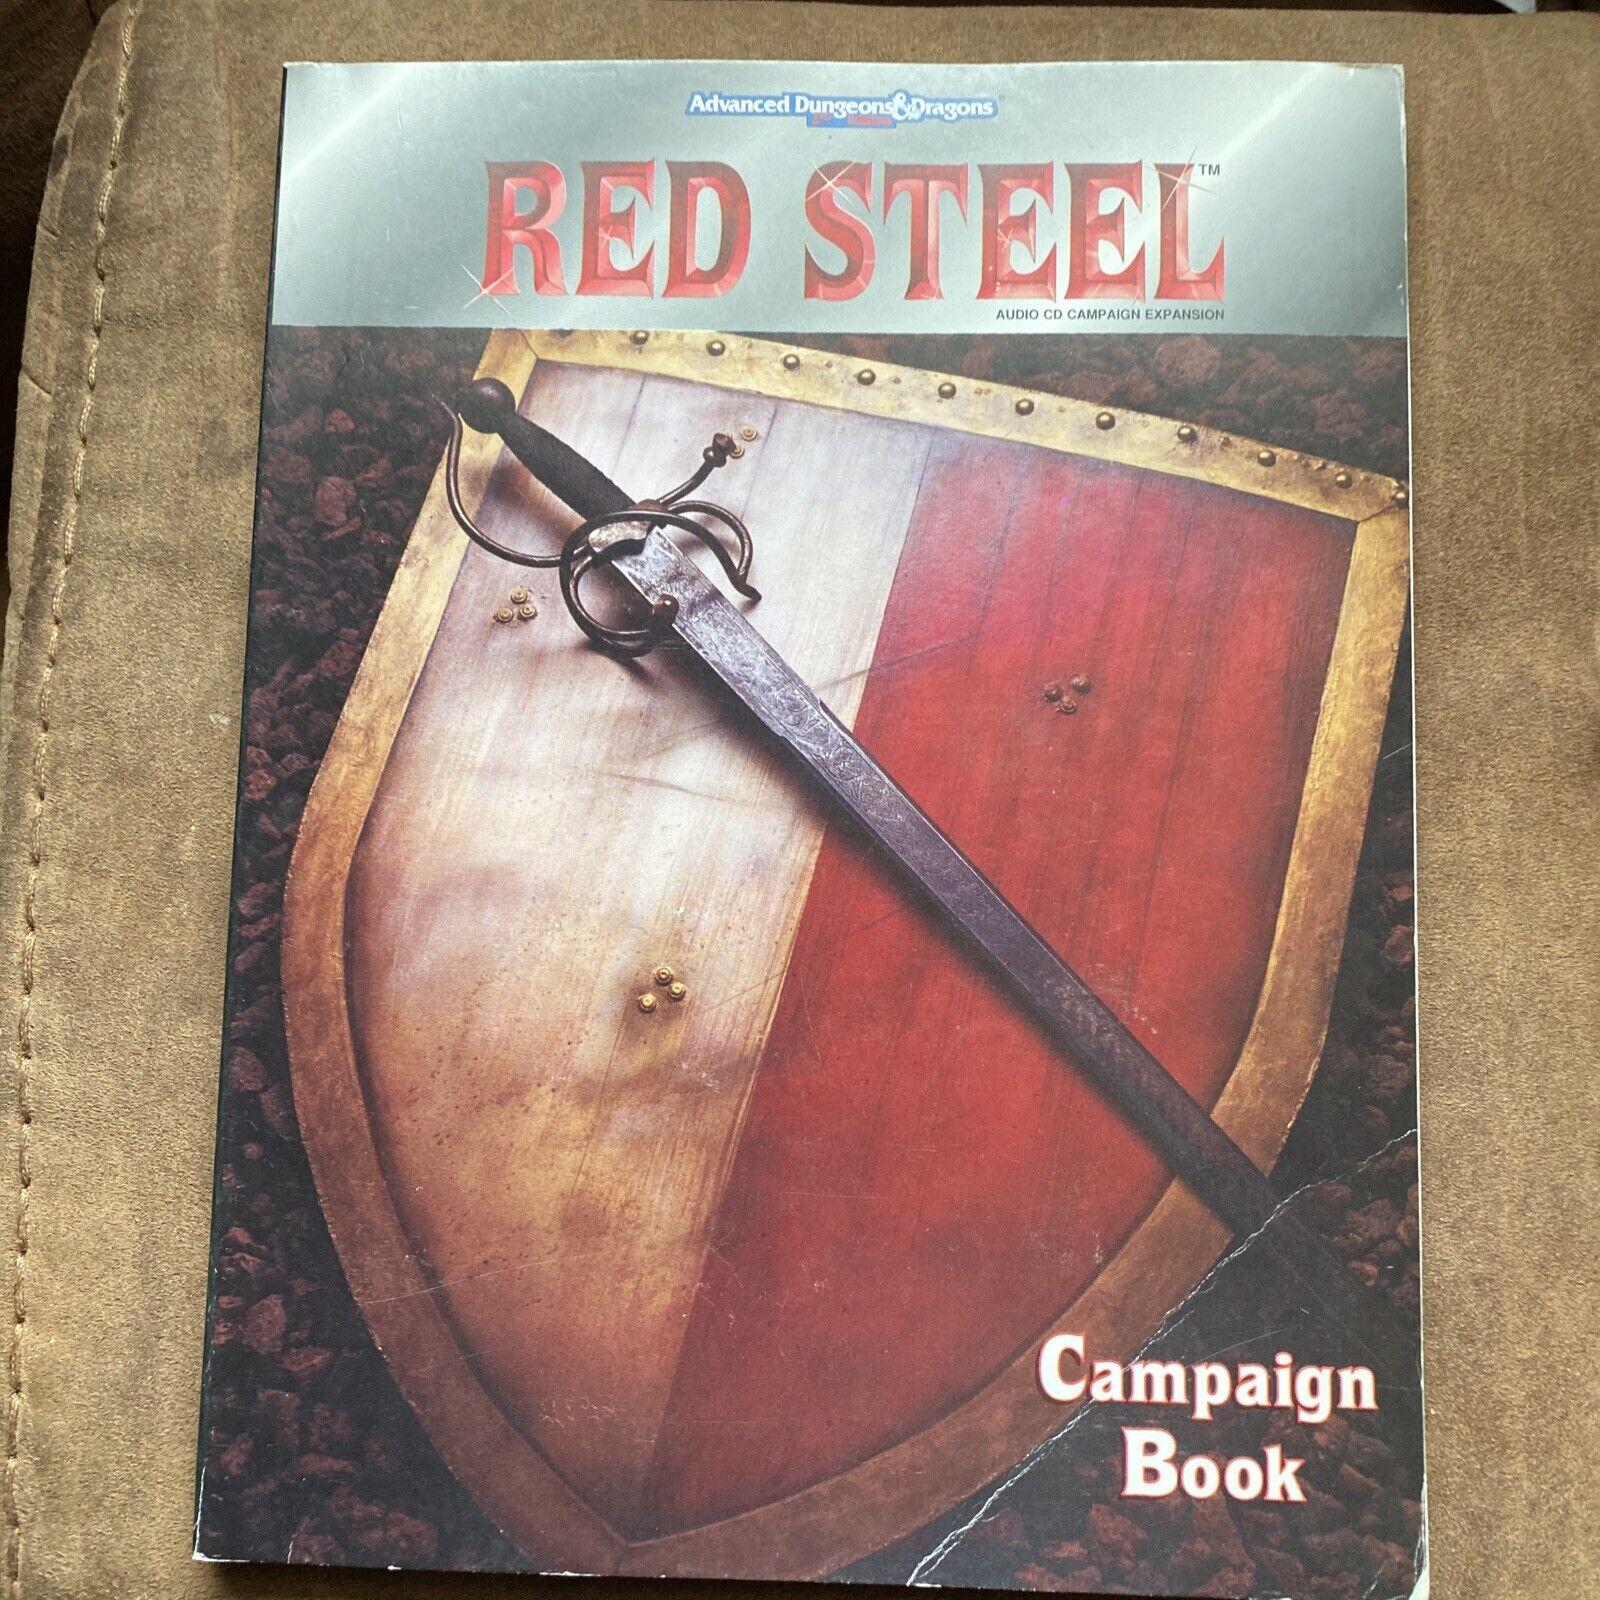 Advanced Dungeons & Dragons Red Steel Campaign Book